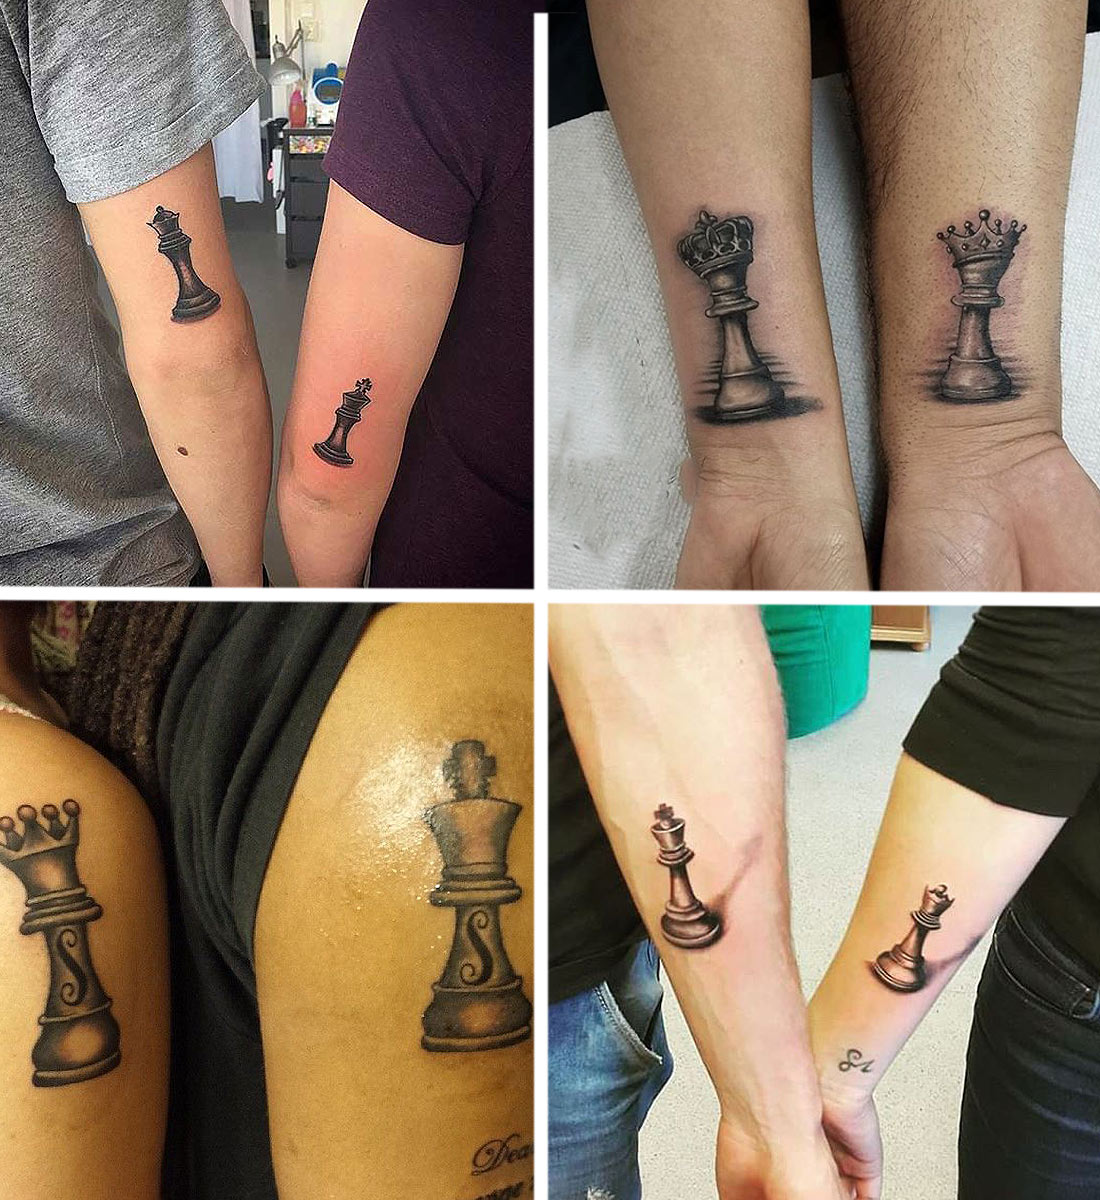 25 Best Valentine's Couple Matching Tattoo Designs You Need To Try - Women  Fashion Lifestyle Blog Shinecoco.com | Meaningful tattoos for couples, Couple  tattoos unique, Best couple tattoos